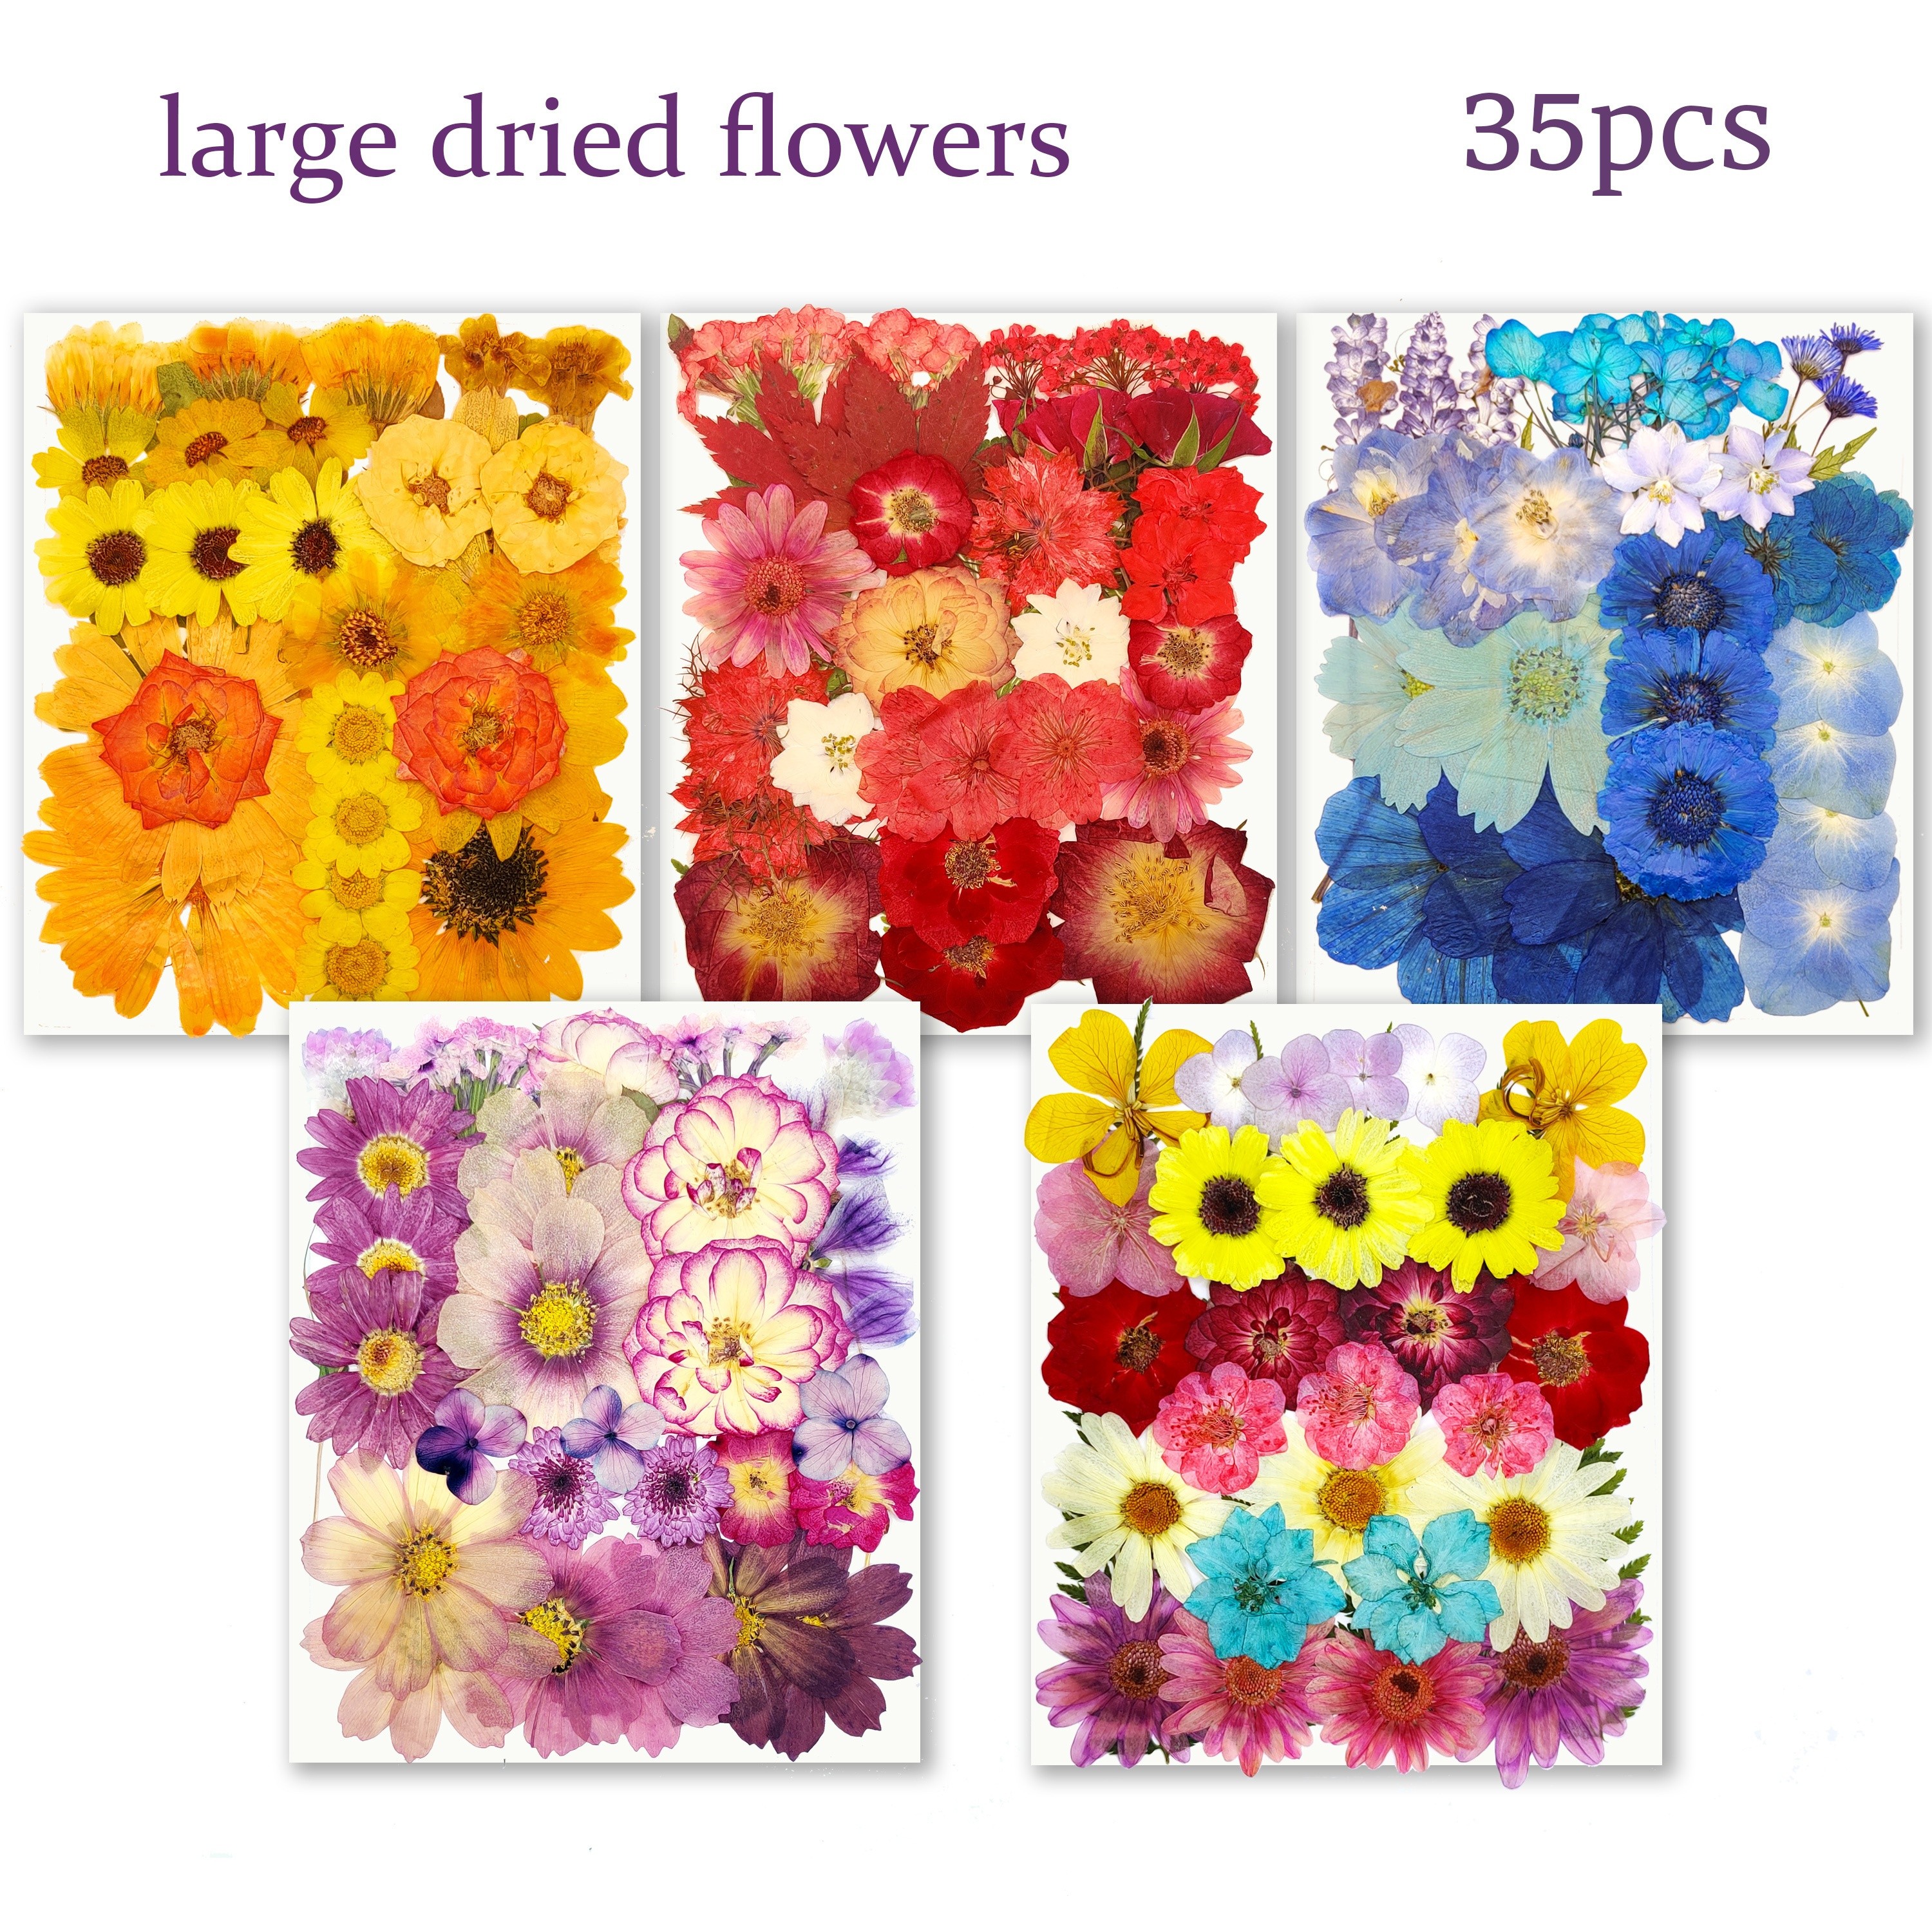 

35pcs Large Dried Pressed Flowers For Resin, Large Real Natural Dry Leaves For Diy Craft, Molds Candle Scrapbooking